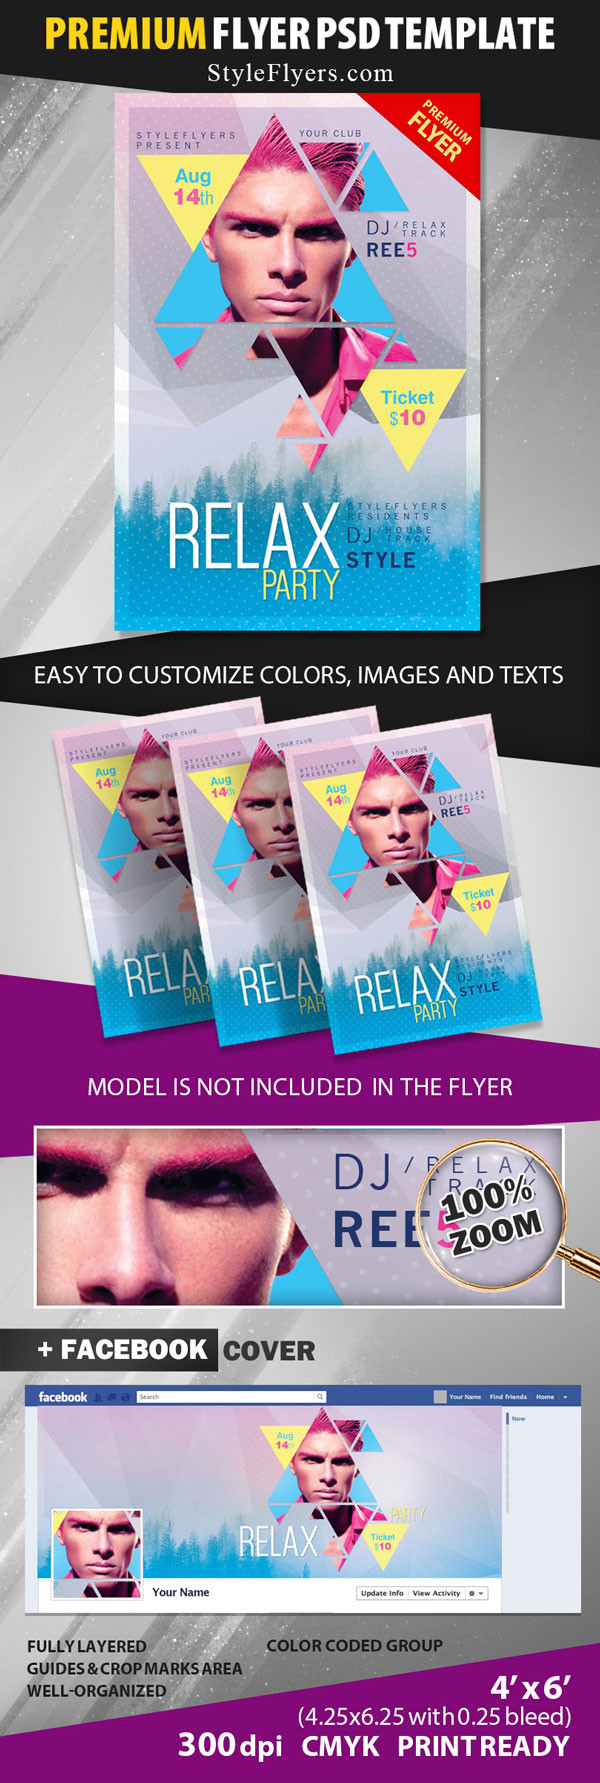 Relax Photoshop PSD Flyer Template